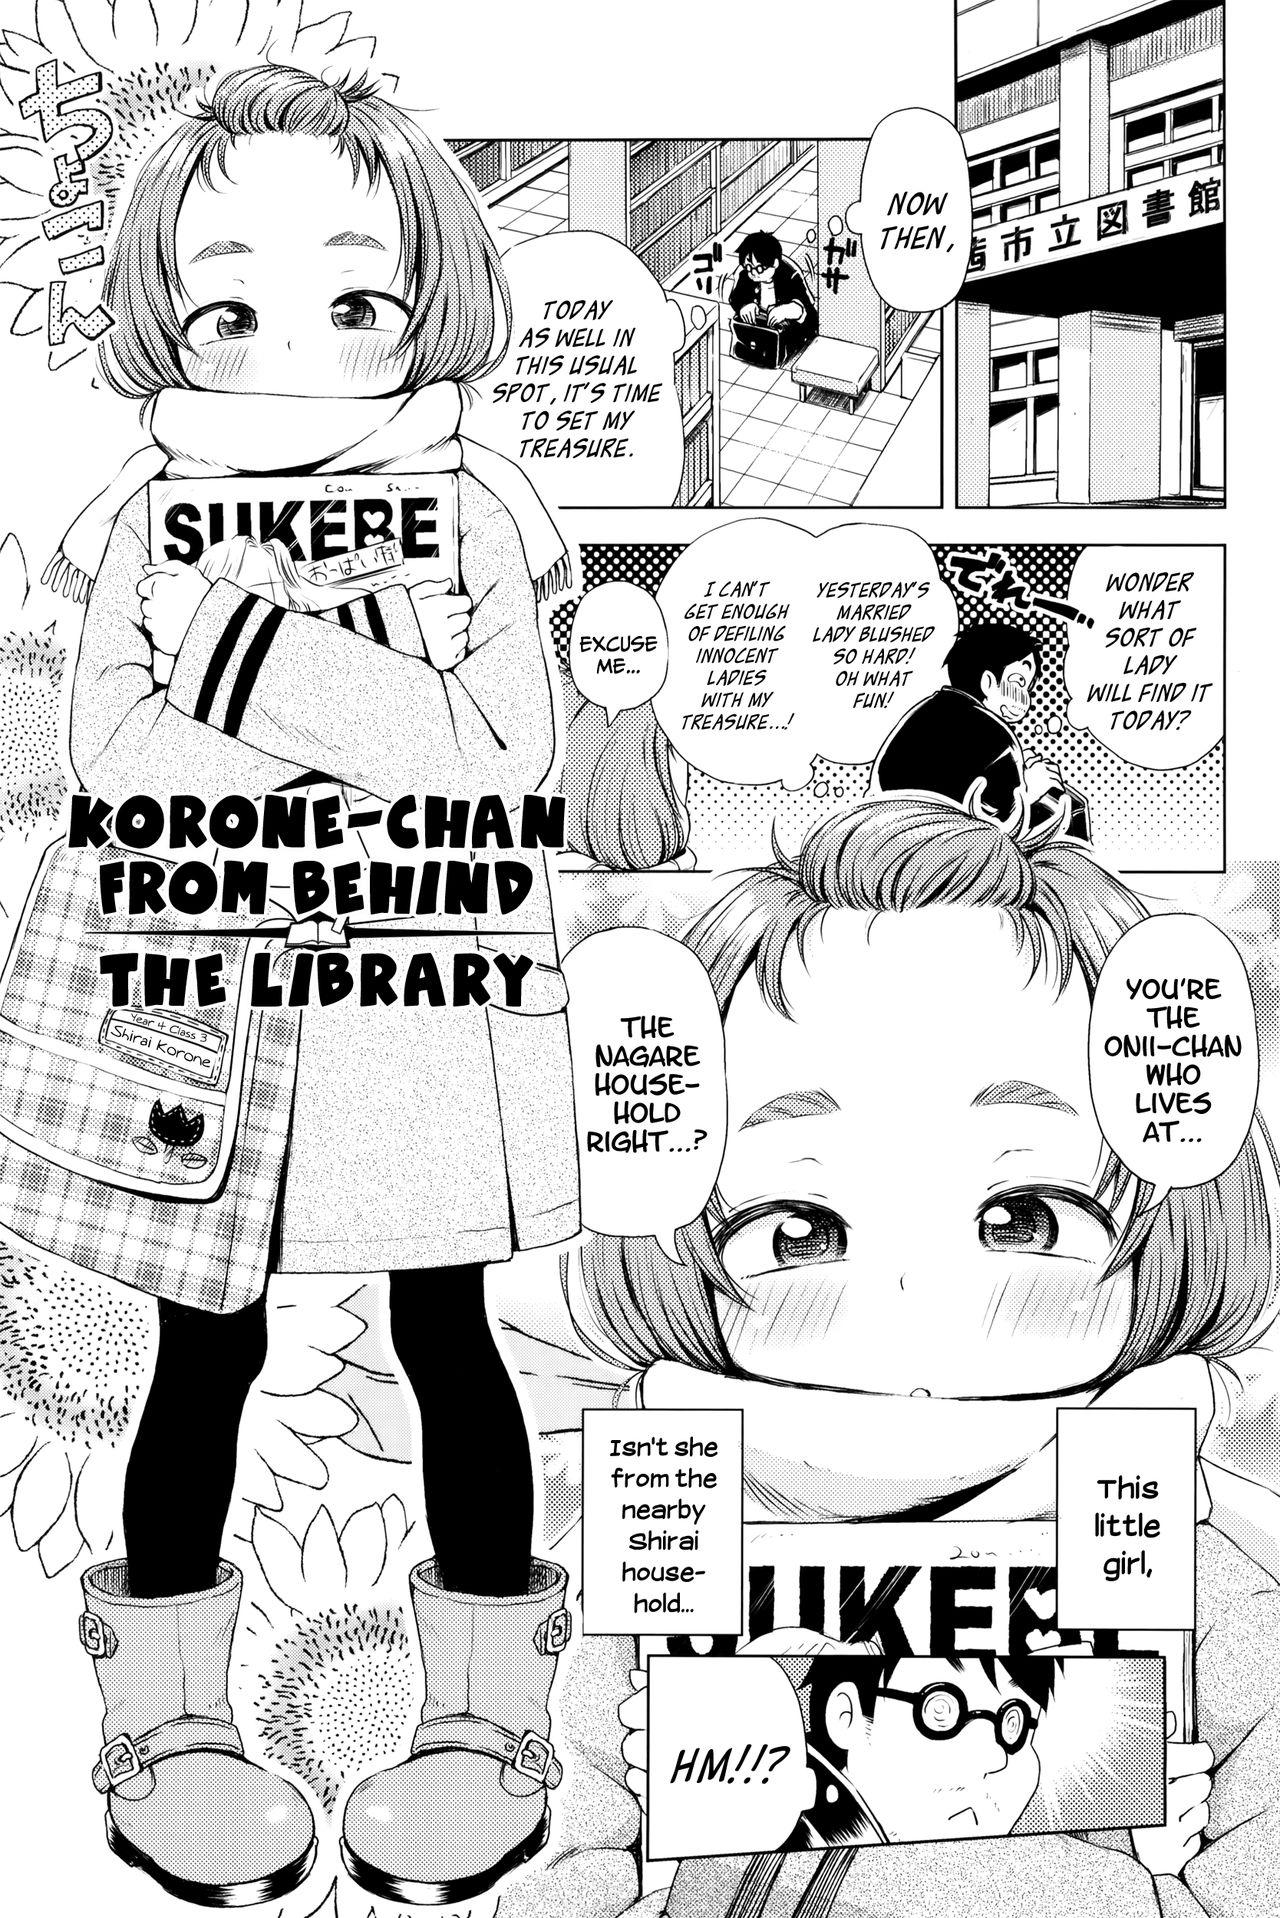 Toshokan Ura no Koronechan from Behind the Library 1